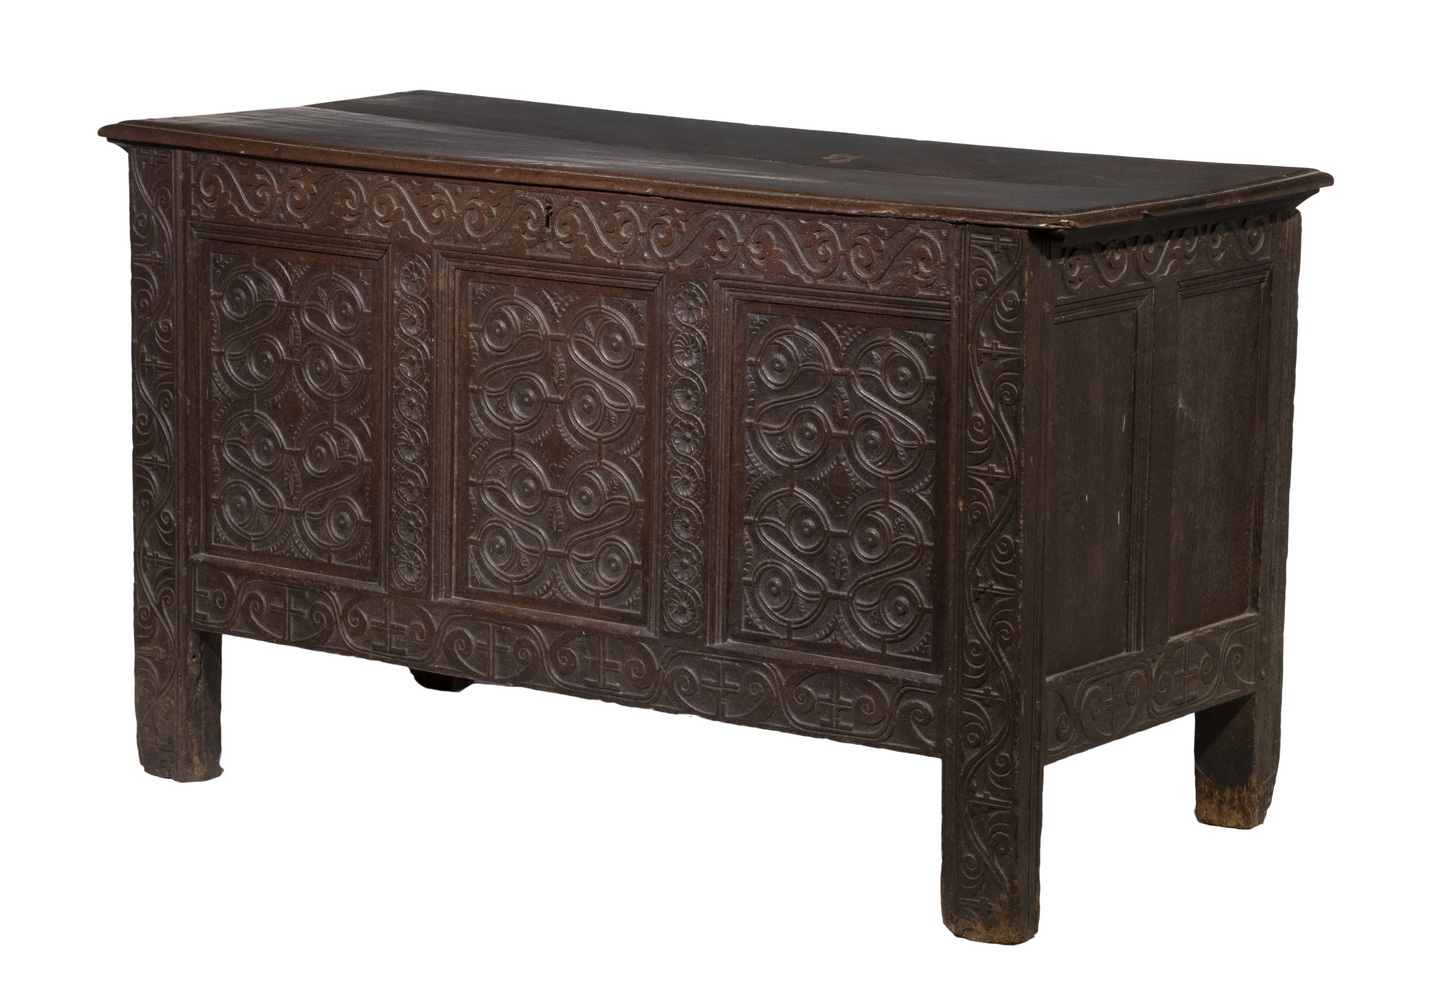 ENGLISH OAK COFFER 17th c Joined 2b3cac